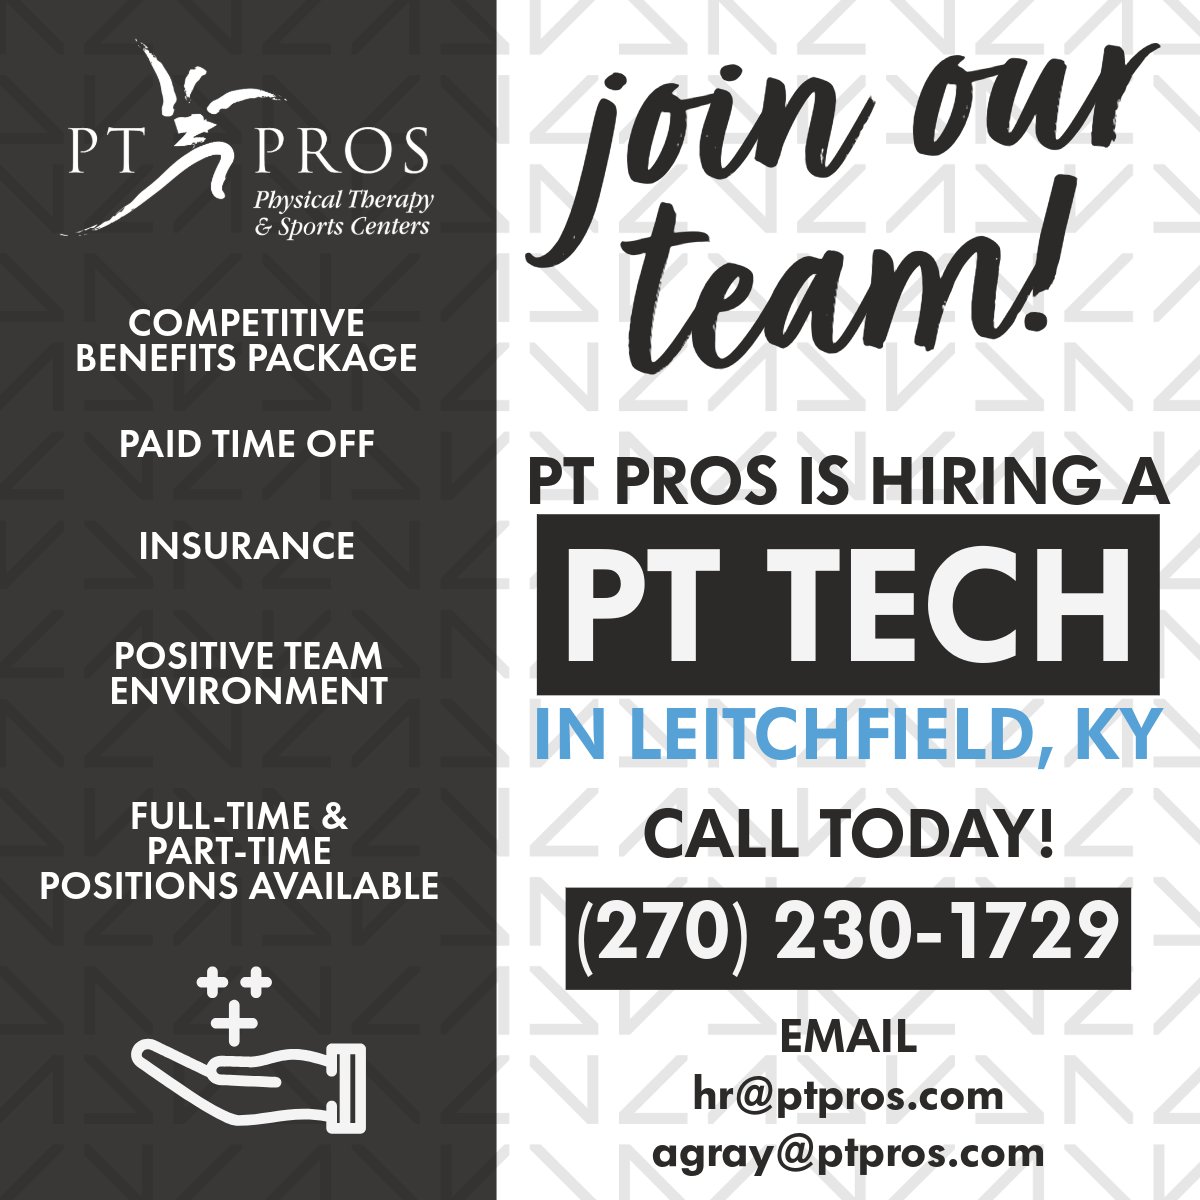 PT Pros Leitchfield is hiring a PT tech! If you are ready to make a difference in the lives of others, we'd love to hear from you. Become a part of the PT Pros team today. 

#GetMoving #YourTeamIsHere #NowHiring #LeitchfieldKY #PhysicalTherapy #PTTech